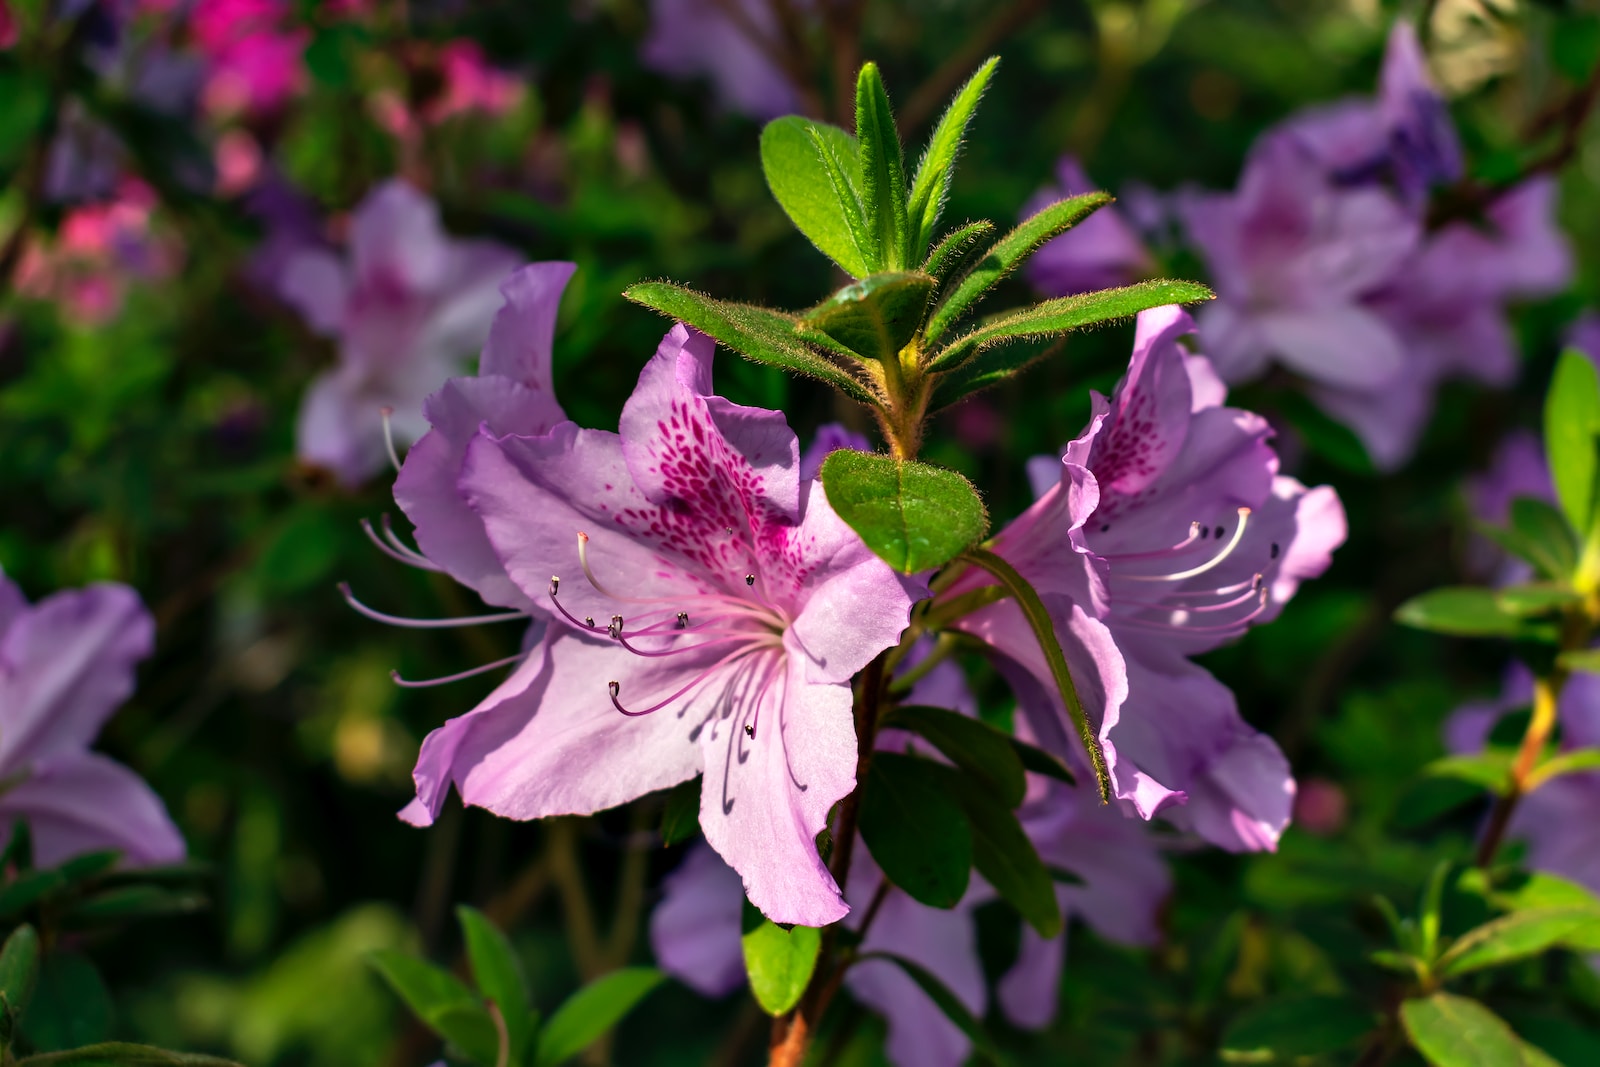 a close up of purple flowers with green leaves